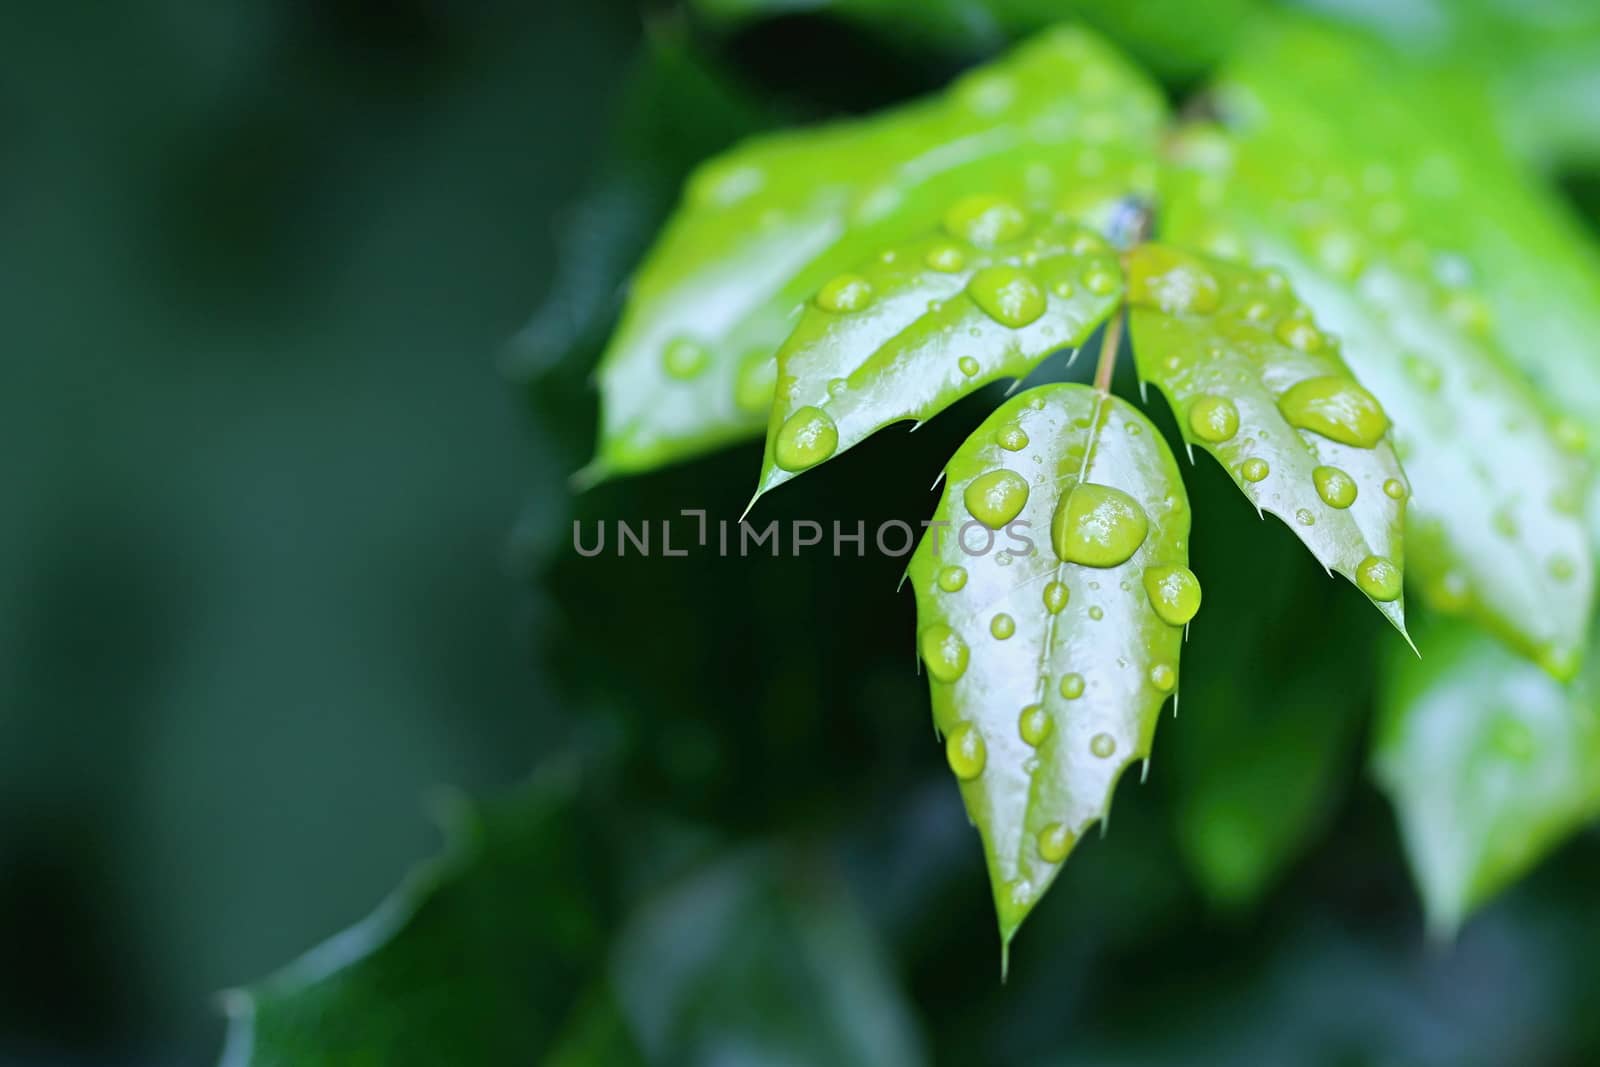 Photo shows details of water drops and green leafs in the garden.